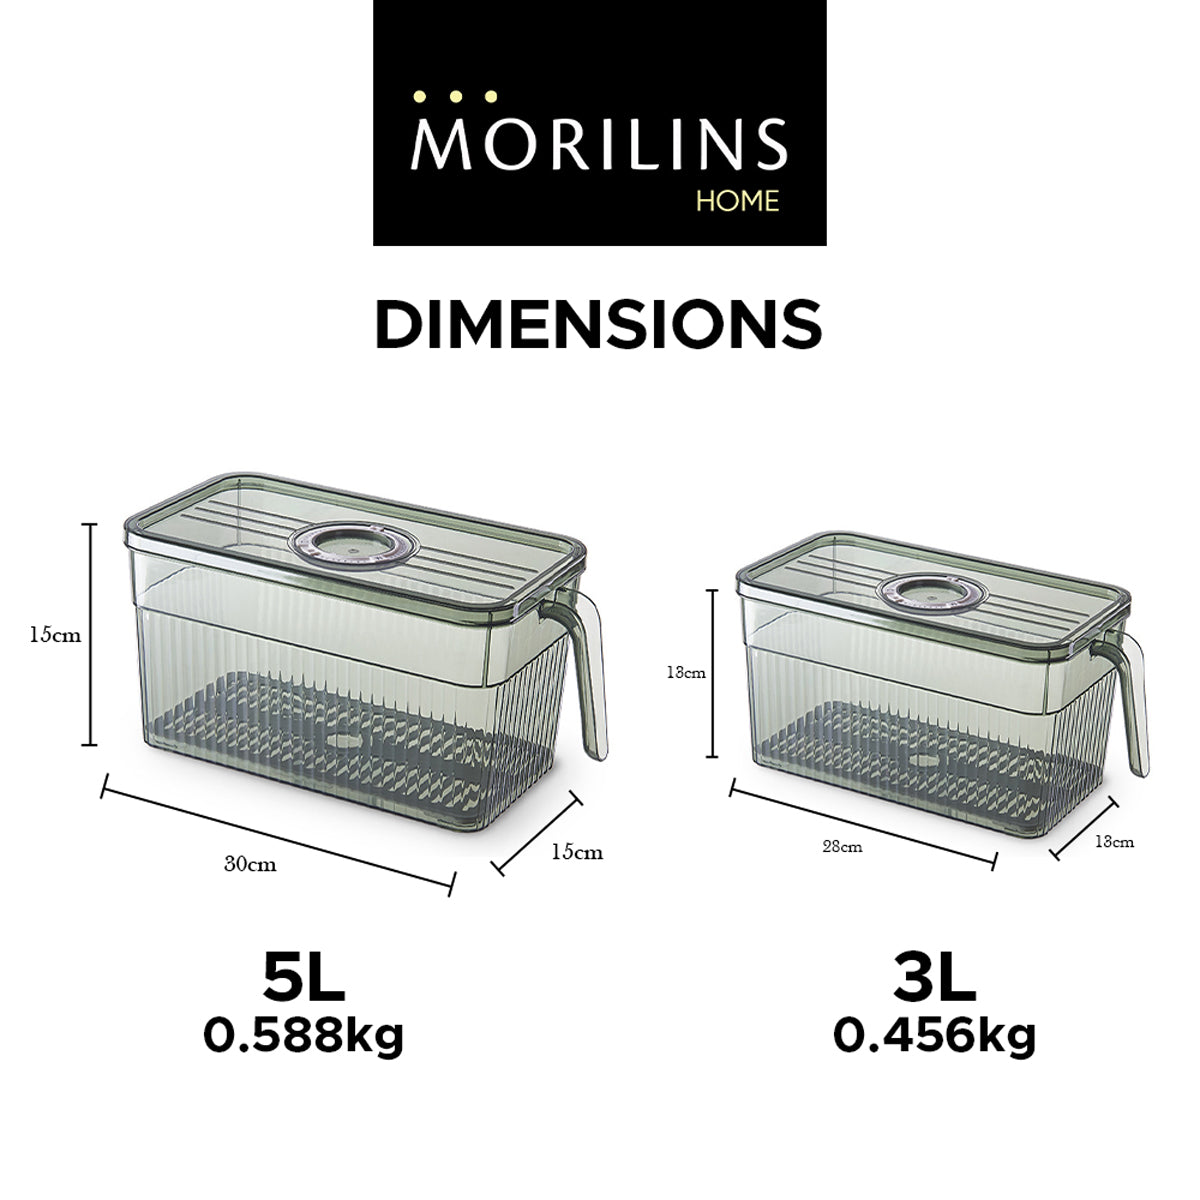 [Morilins Home] Designer Fridge Produce Organizer - BPA-Free, with Handle & Date Cover, Includes a Unique Condensation Tray for Fresh Produce Storage - Bloom Concept